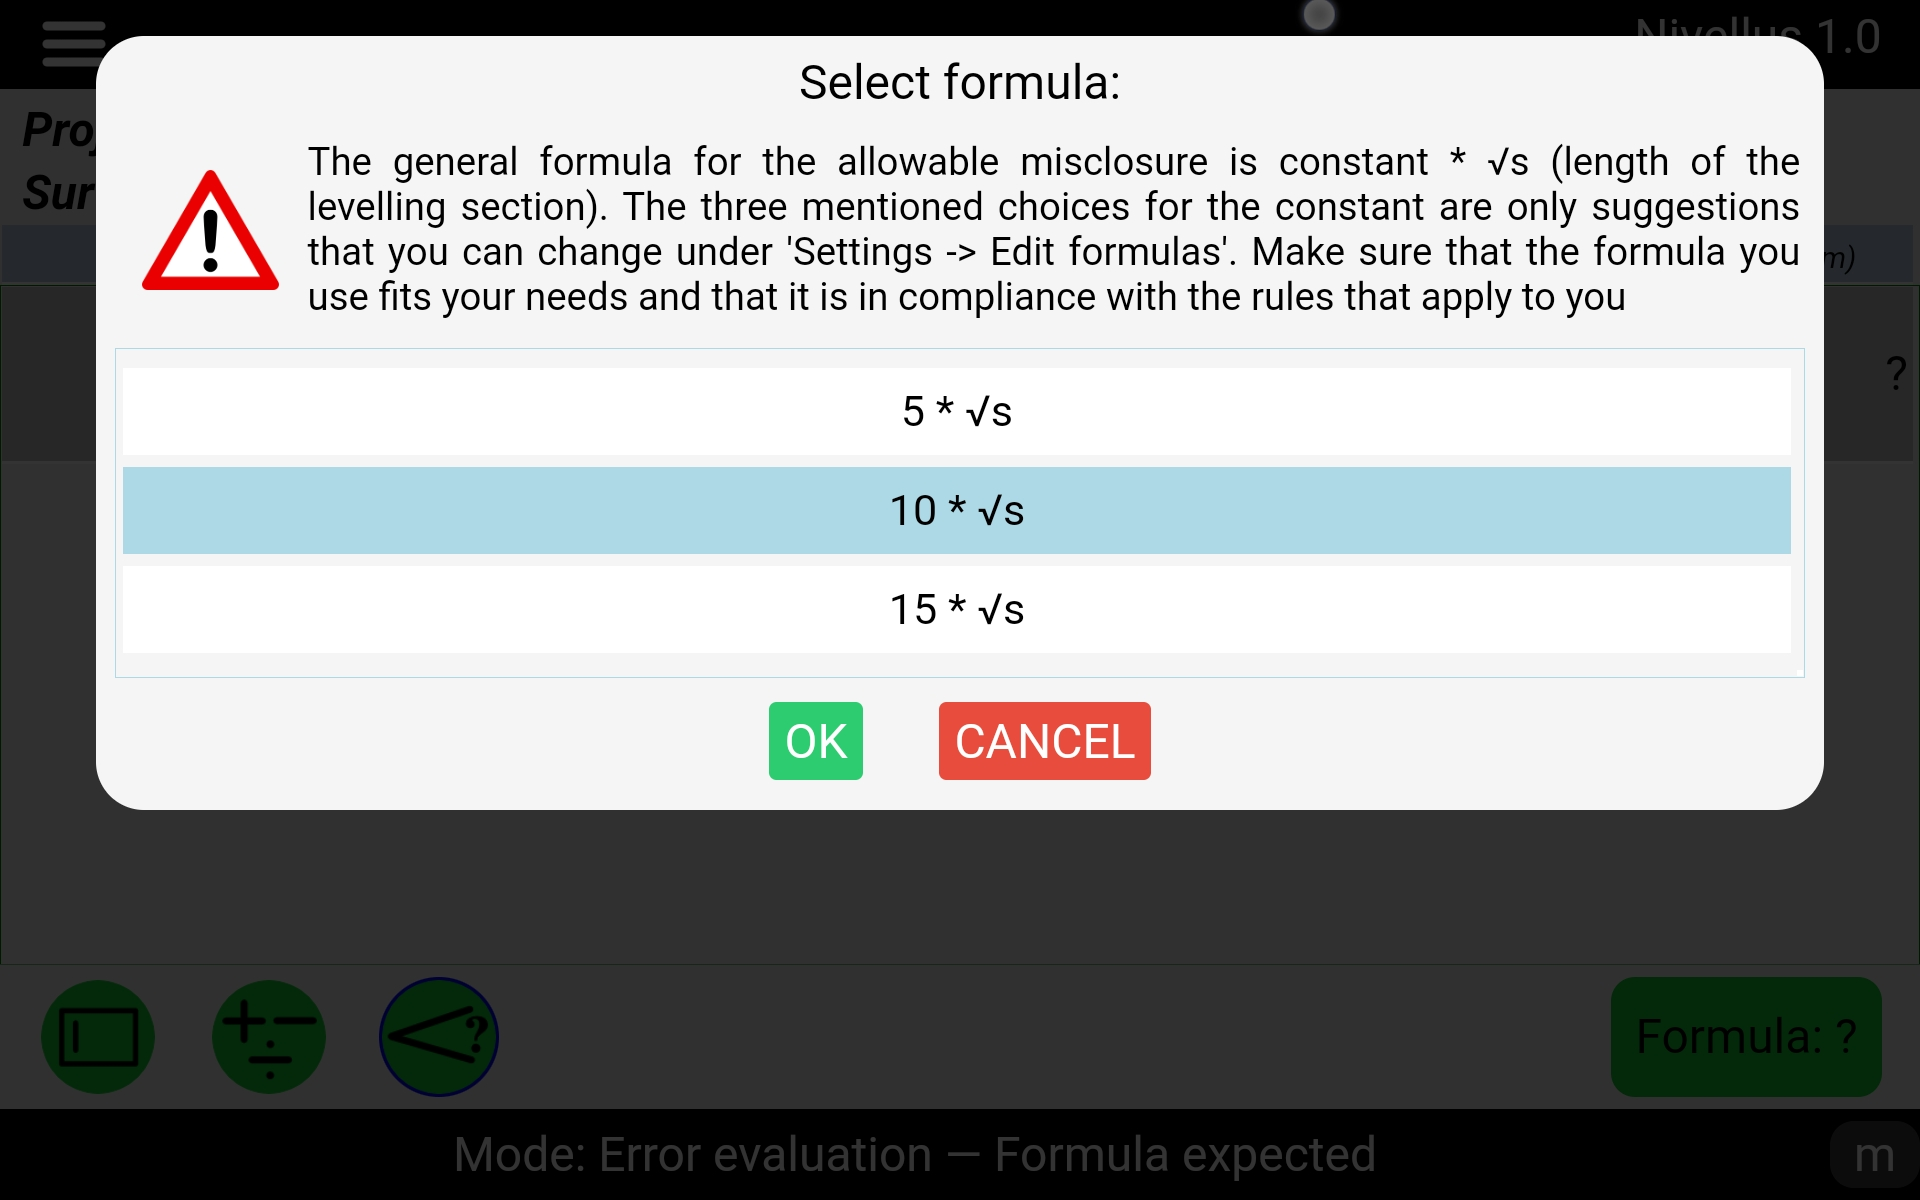 Select formula for calculation of the allowable misclosure